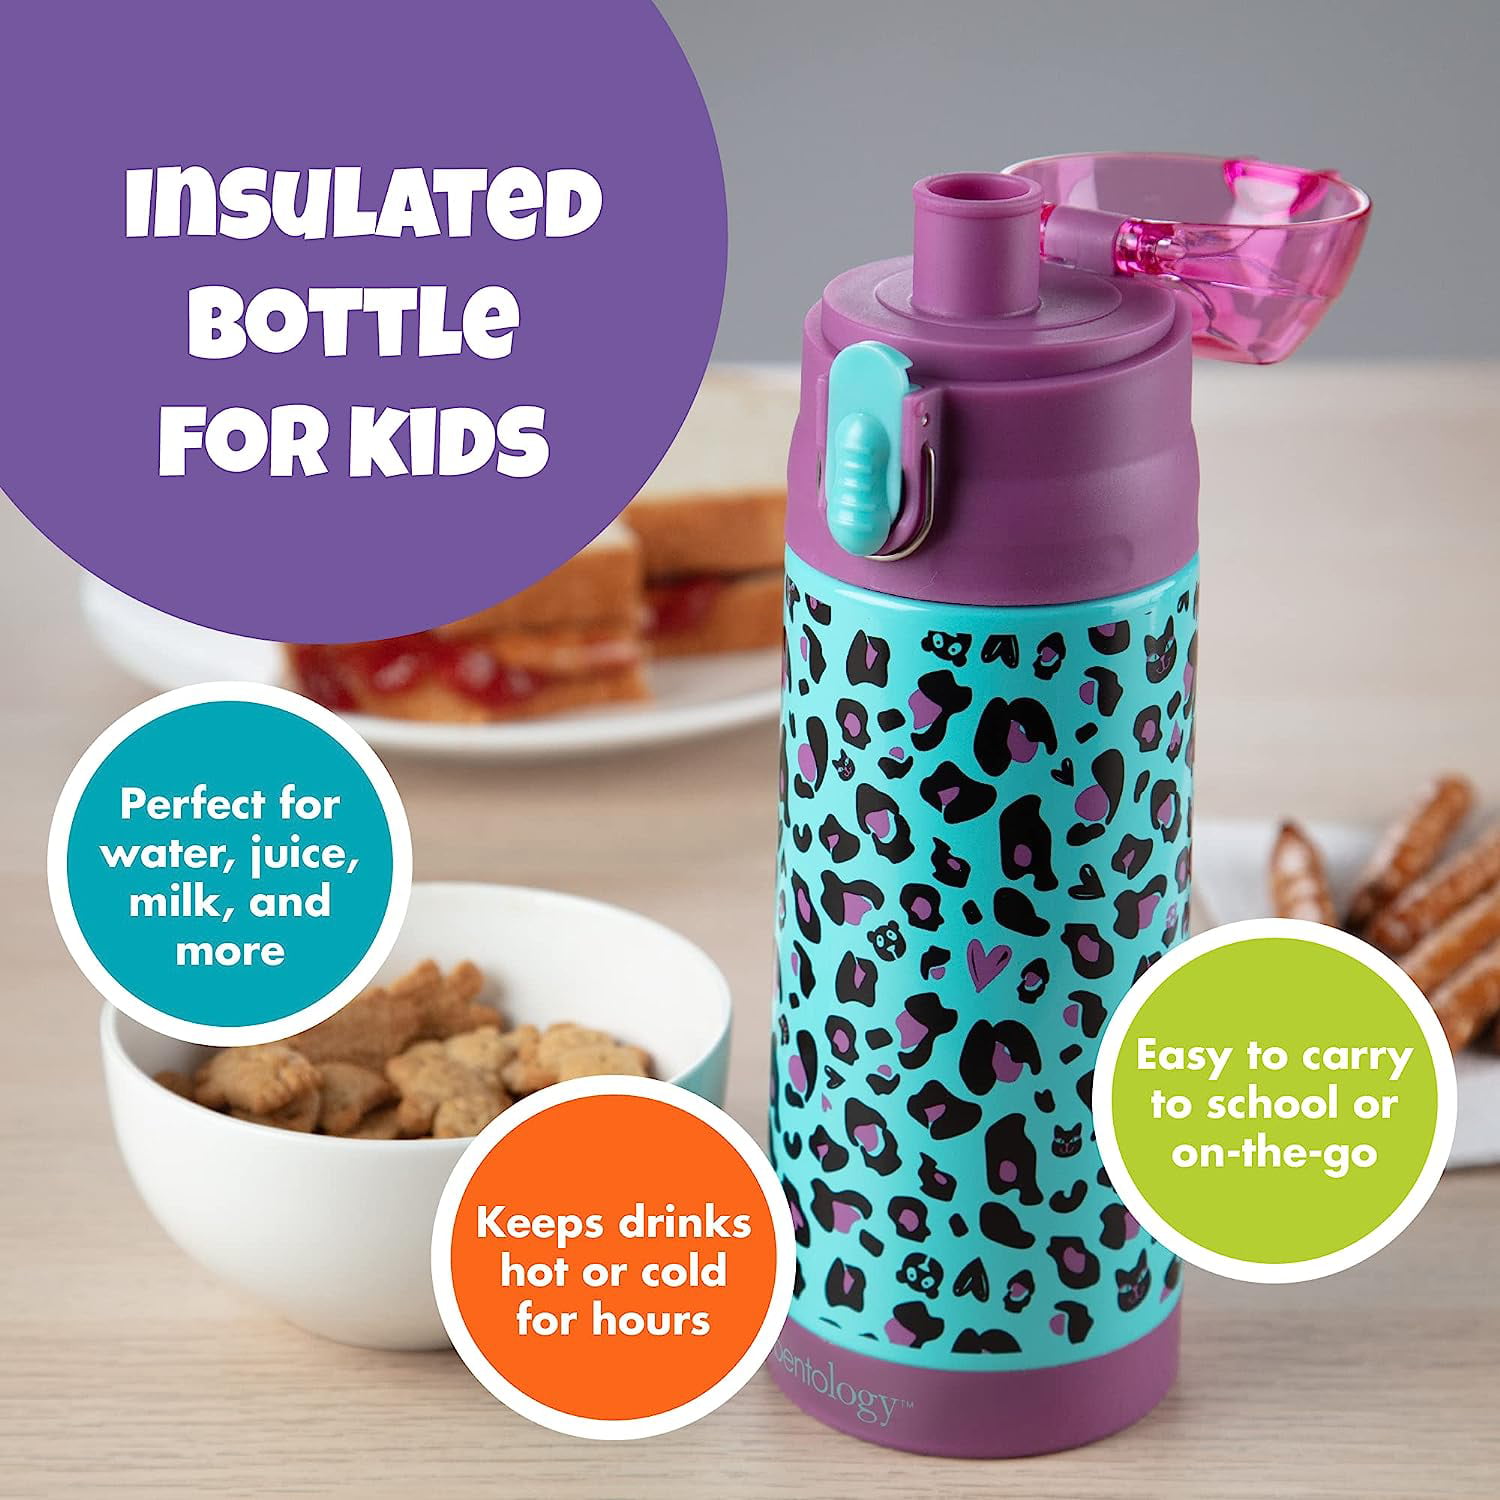 Double Wall Insulated 13oz Reusable Water Bottle for Kids - Cheetah - Spill  Proof Lid, Stainless Steel - Keep Liquids Hot/Cold For Hours - Use in Lunch  Boxes, Backpack School Bags or